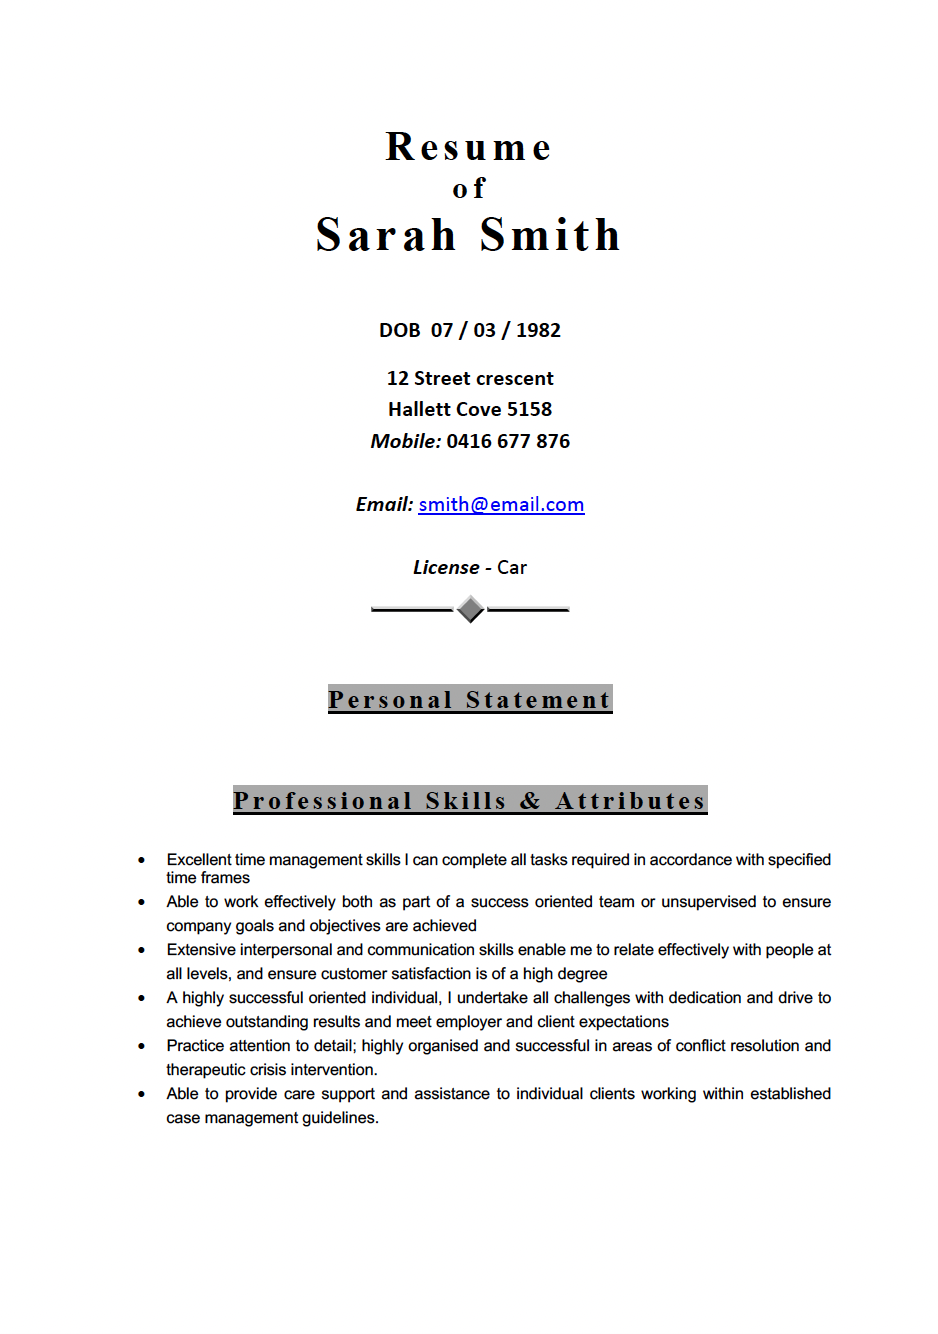 resume and cover letter gold coast